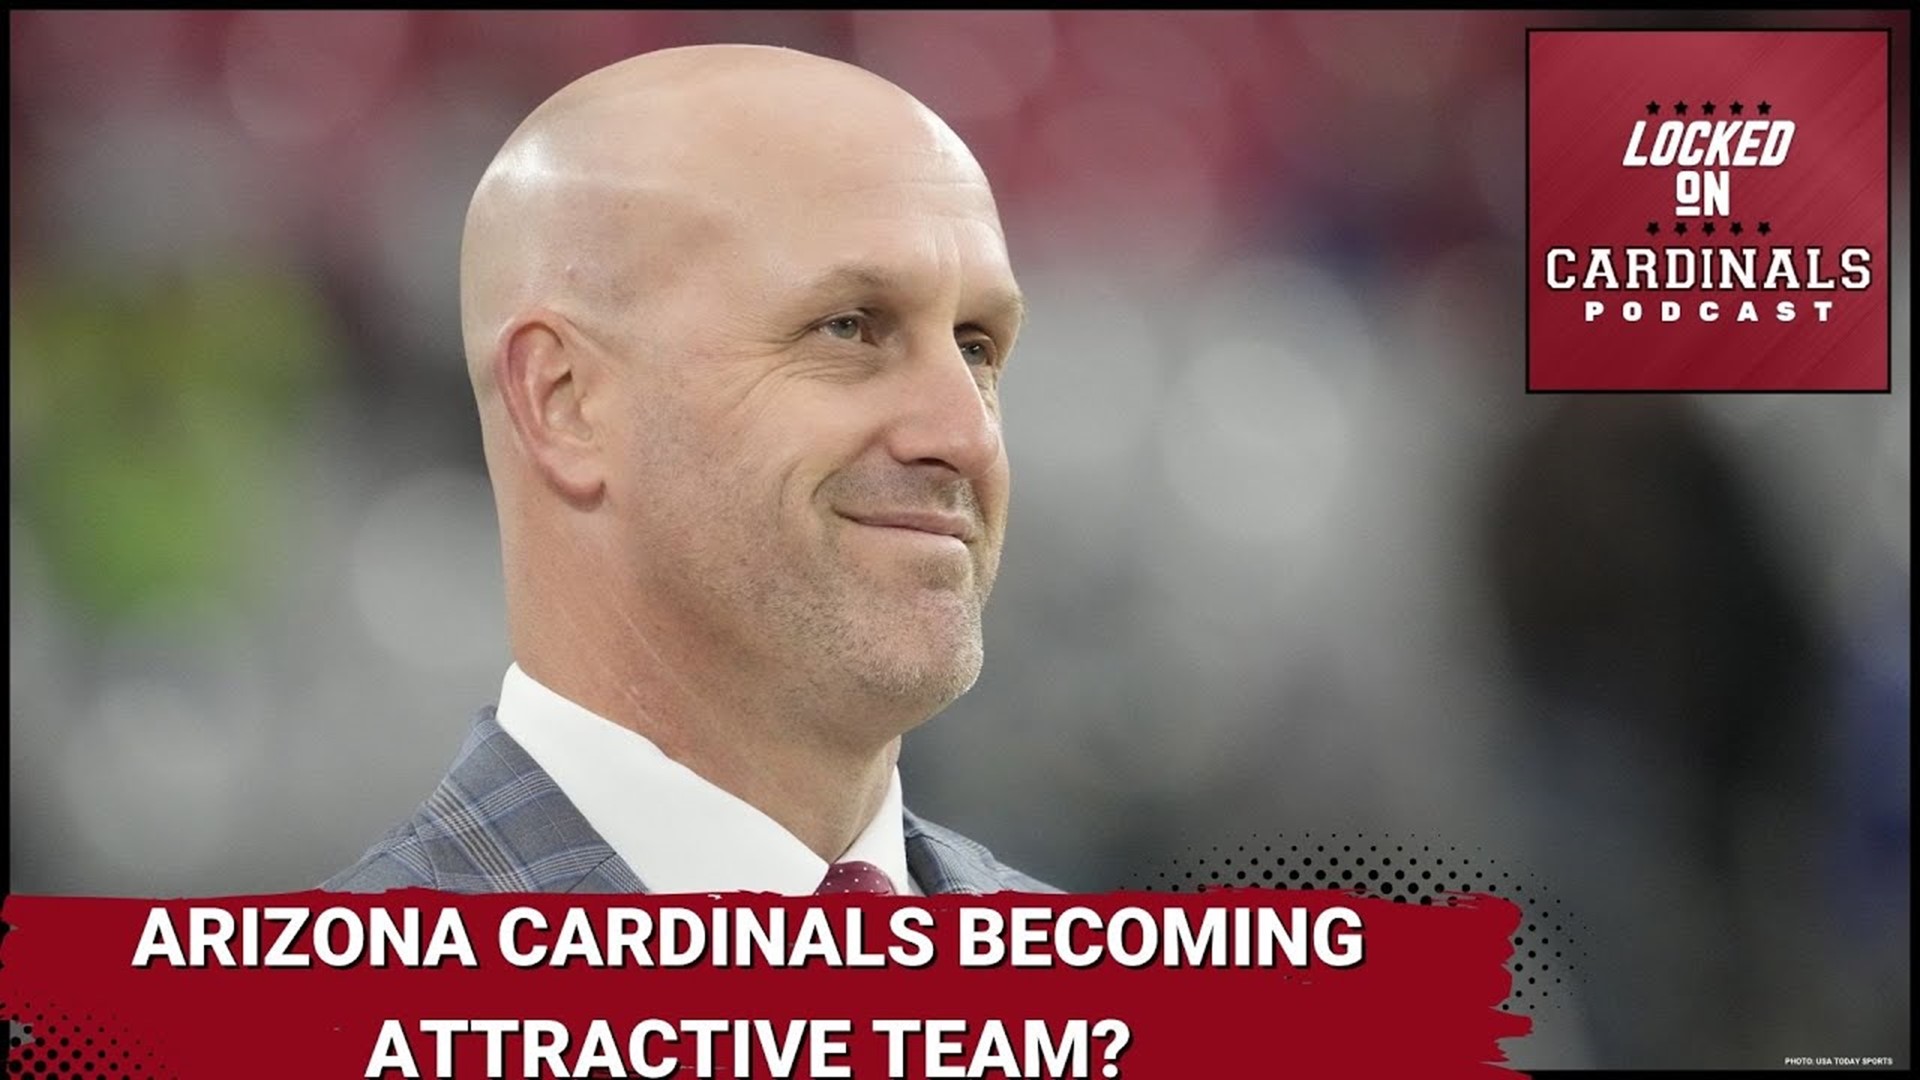 Arizona Cardinals have been through a tumultuous handful of seasons, Flashing forward to present day, the Arizona Cardinals seem to have what looks to be progress